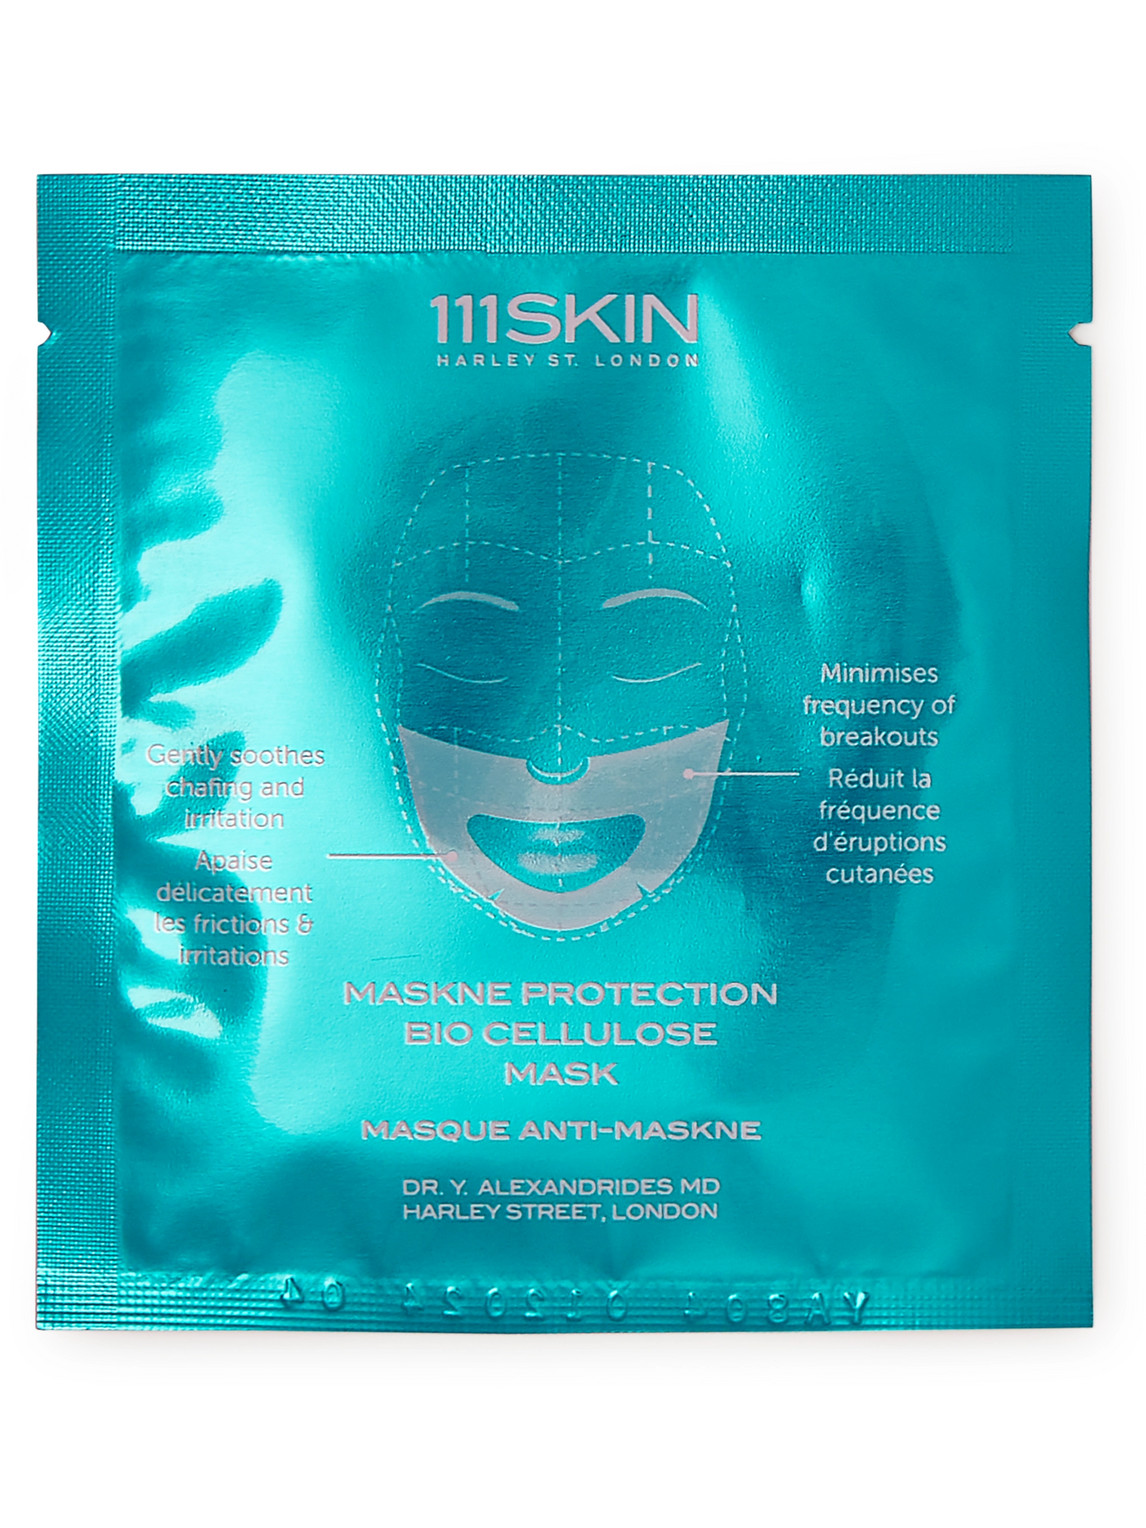 111skin Maskne Protection Bio-cellulose Mask, 5 X 10ml In Colourless